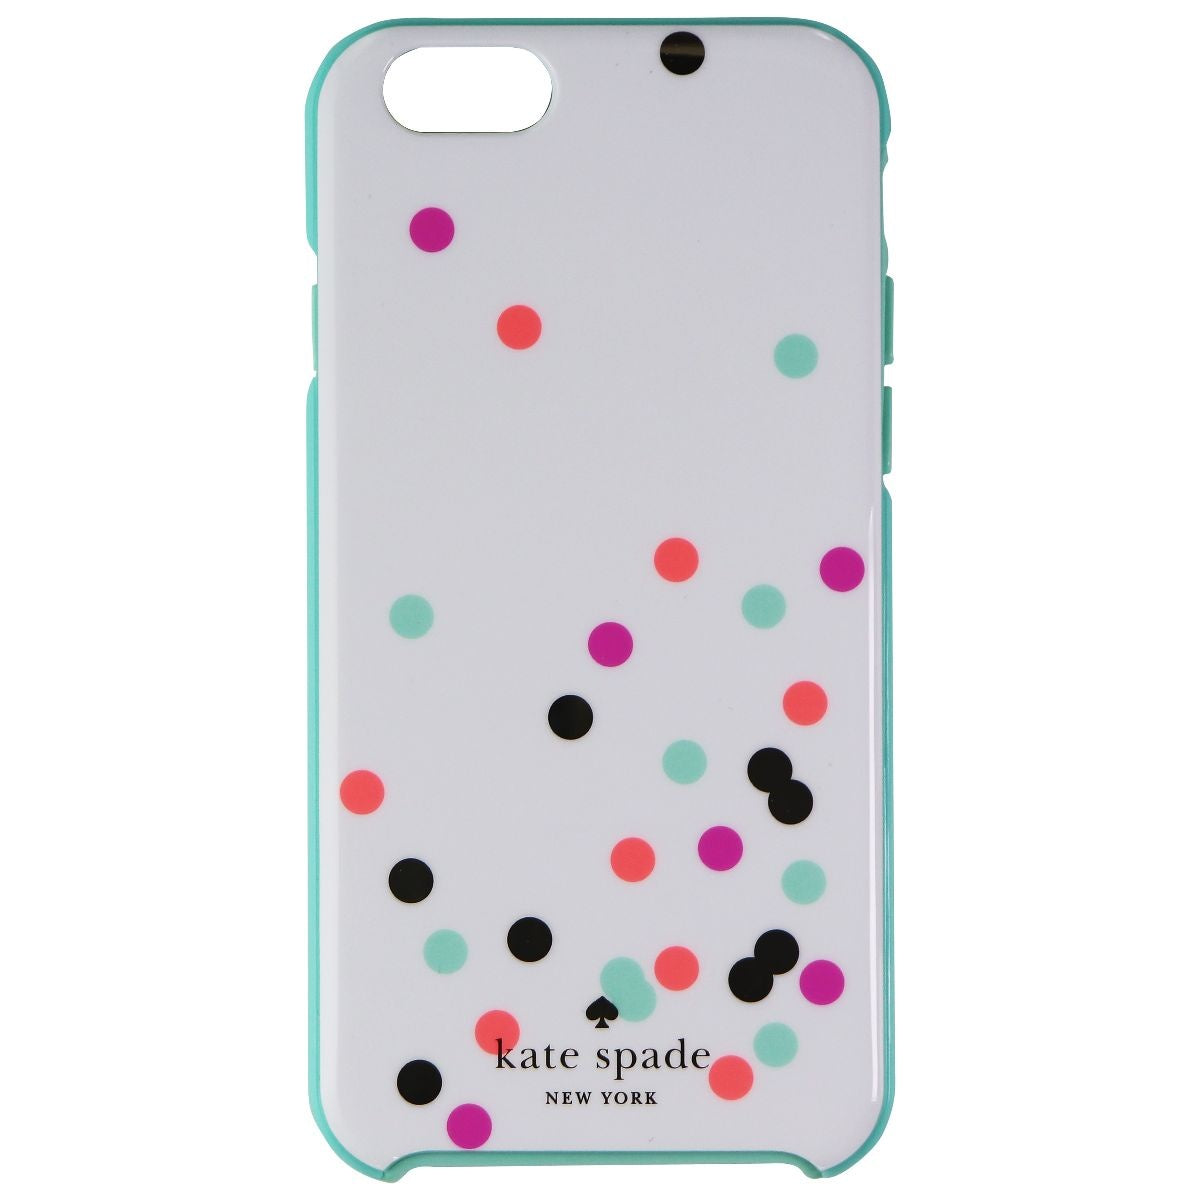 Kate Spade Hybrid Hardshell Case for Apple iPhone 6s/6 - Teal/White/Multi Cell Phone - Cases, Covers & Skins Kate Spade    - Simple Cell Bulk Wholesale Pricing - USA Seller